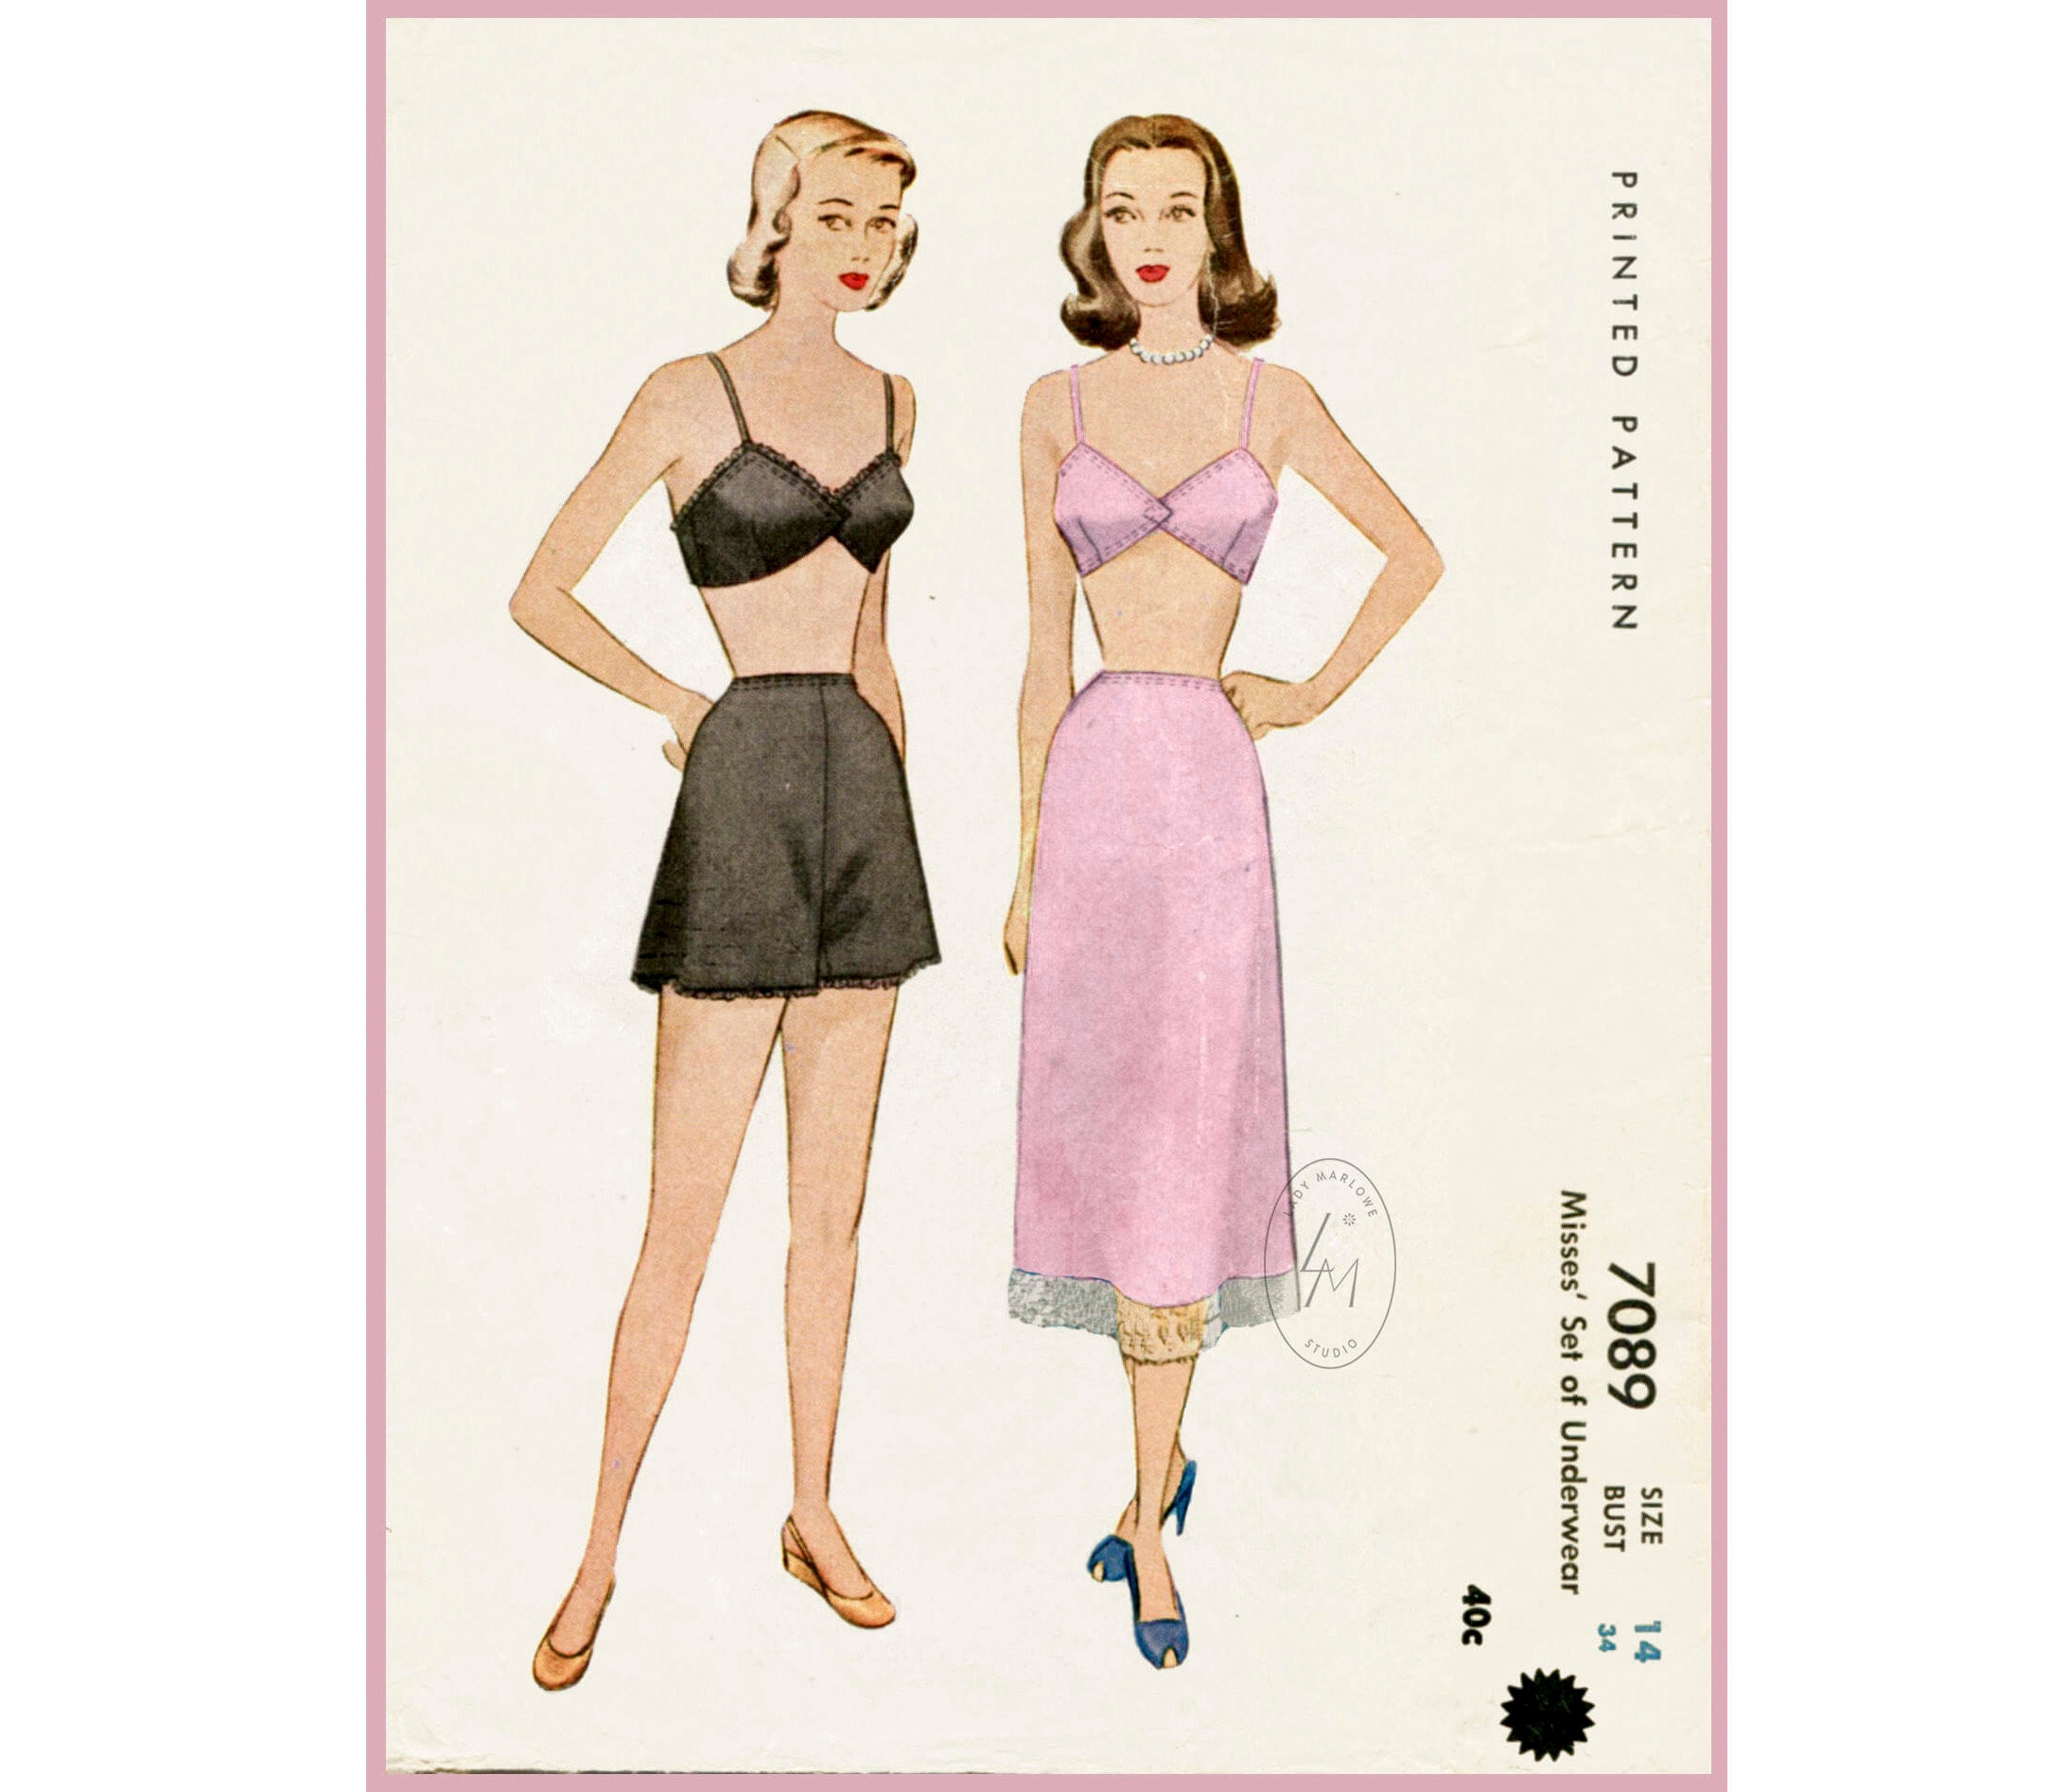 Vintage Sewing Pattern Vintage Bra Pattern 1940s 1950s Lingerie Bralette  Tap Short Slip Skirt Bust 34 B34 English & French Reproduction -  Canada